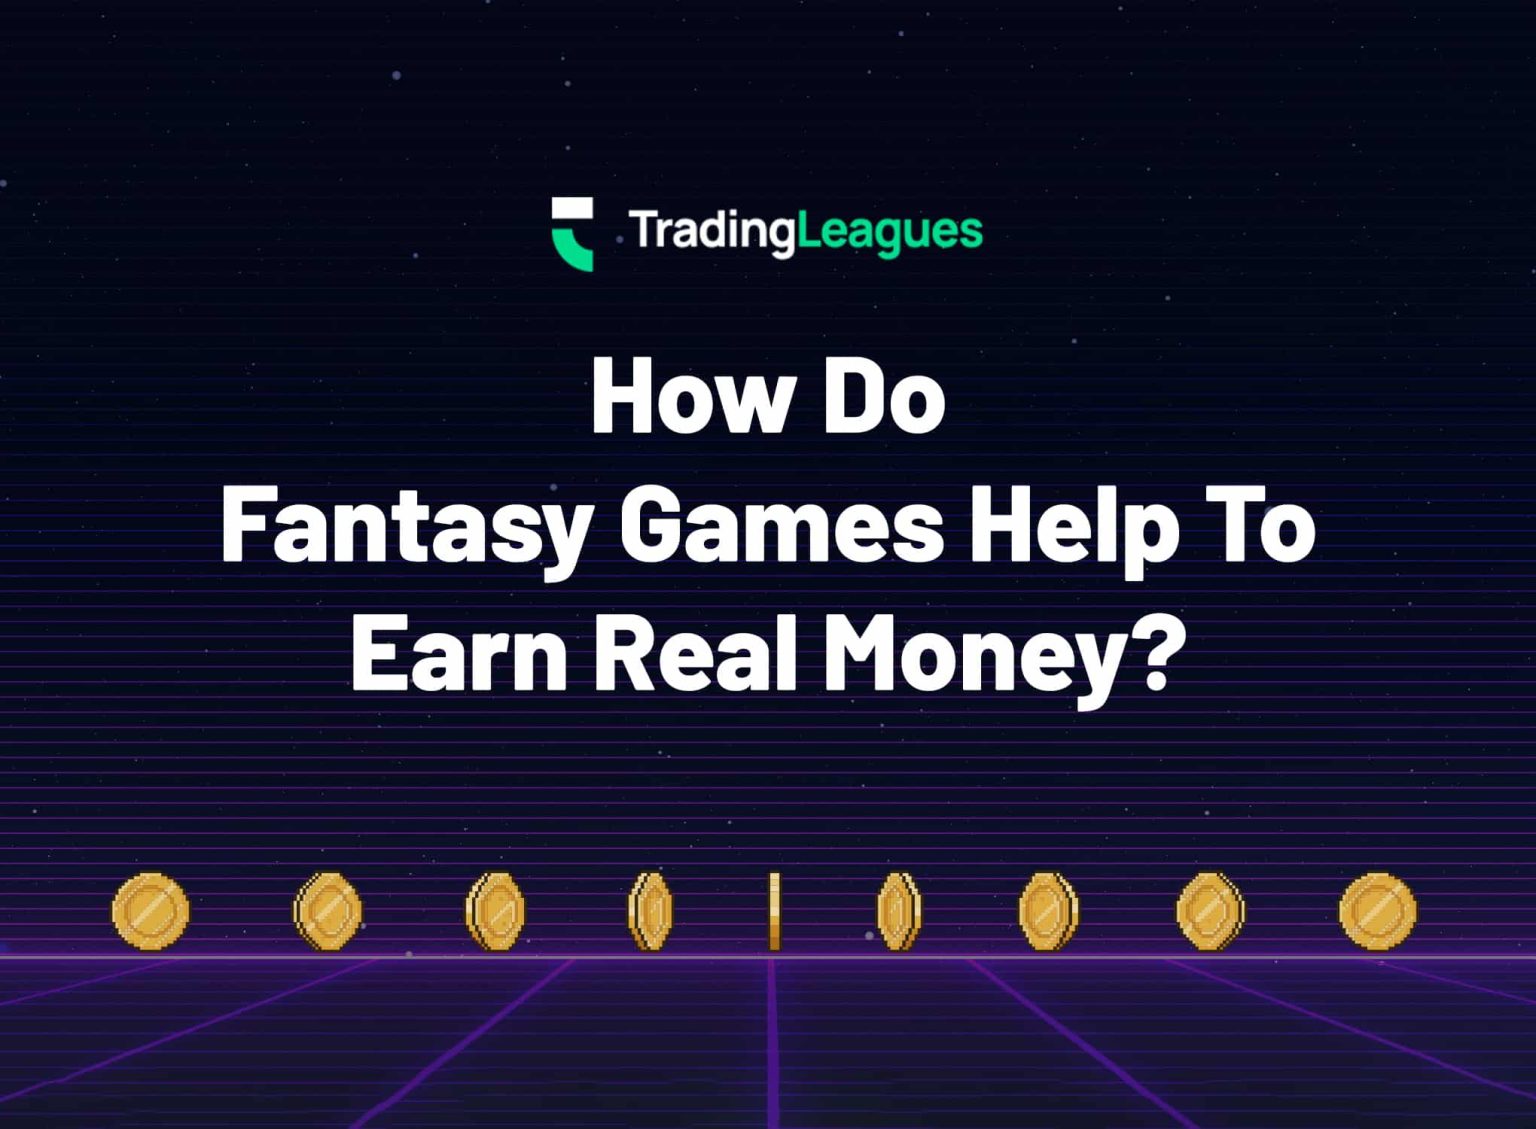 How Do Fantasy Games Help To Earn Real Money